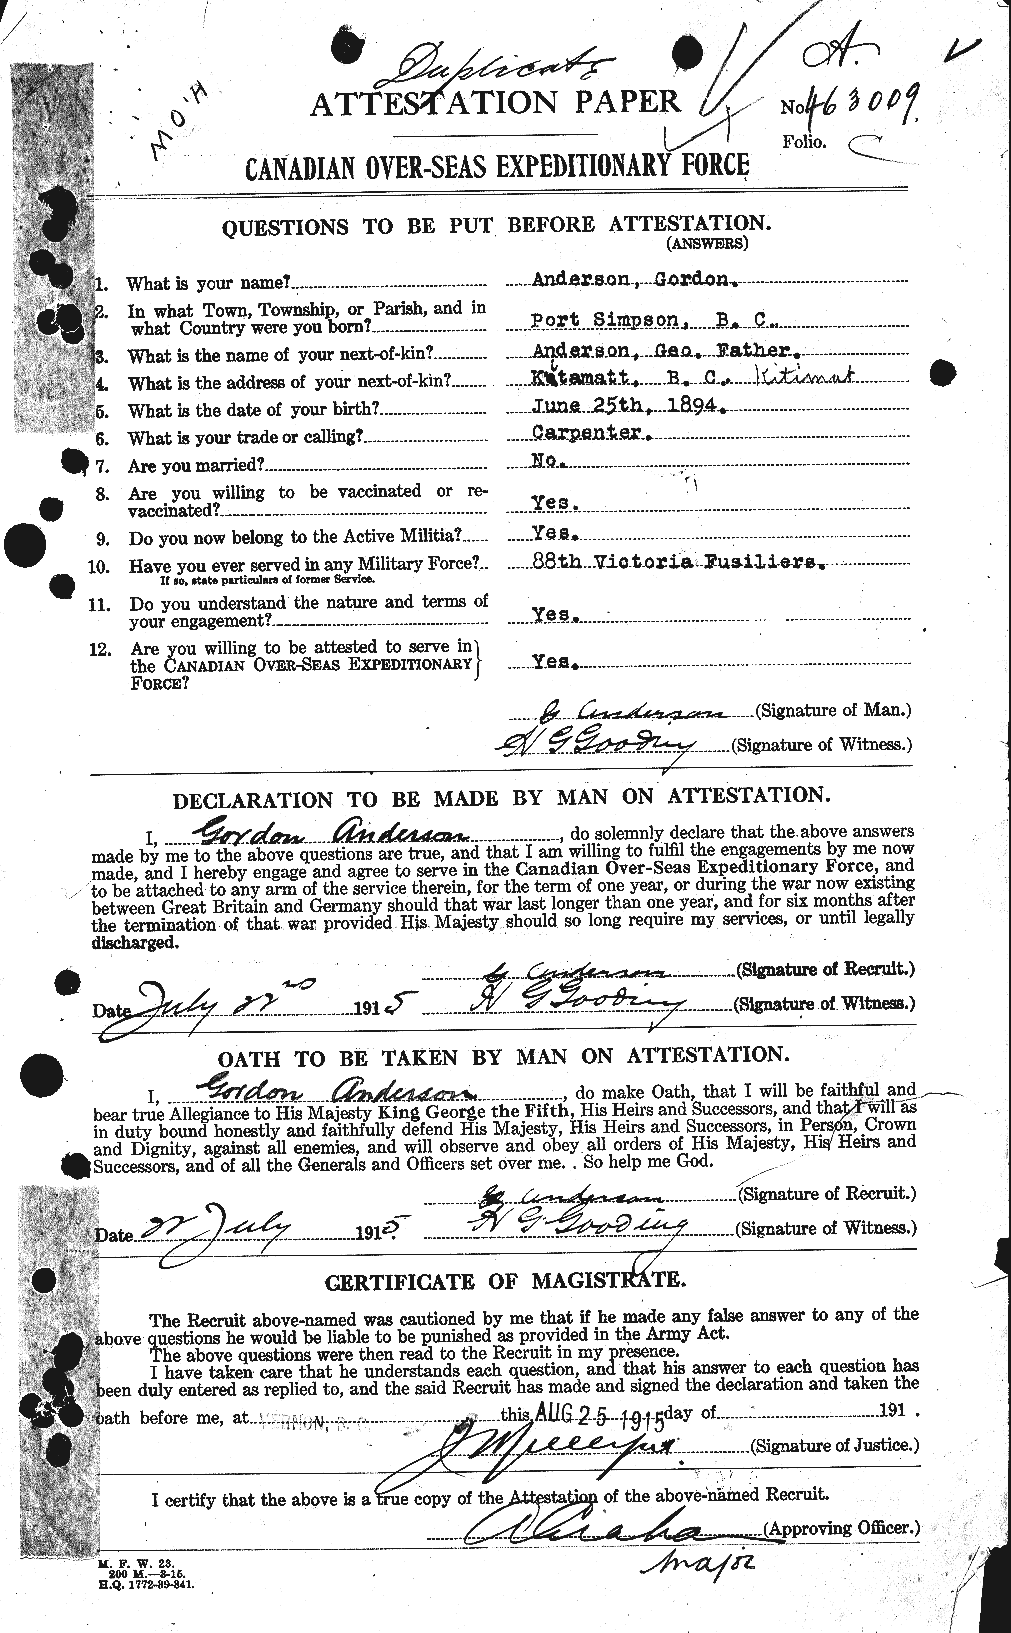 Personnel Records of the First World War - CEF 209668a